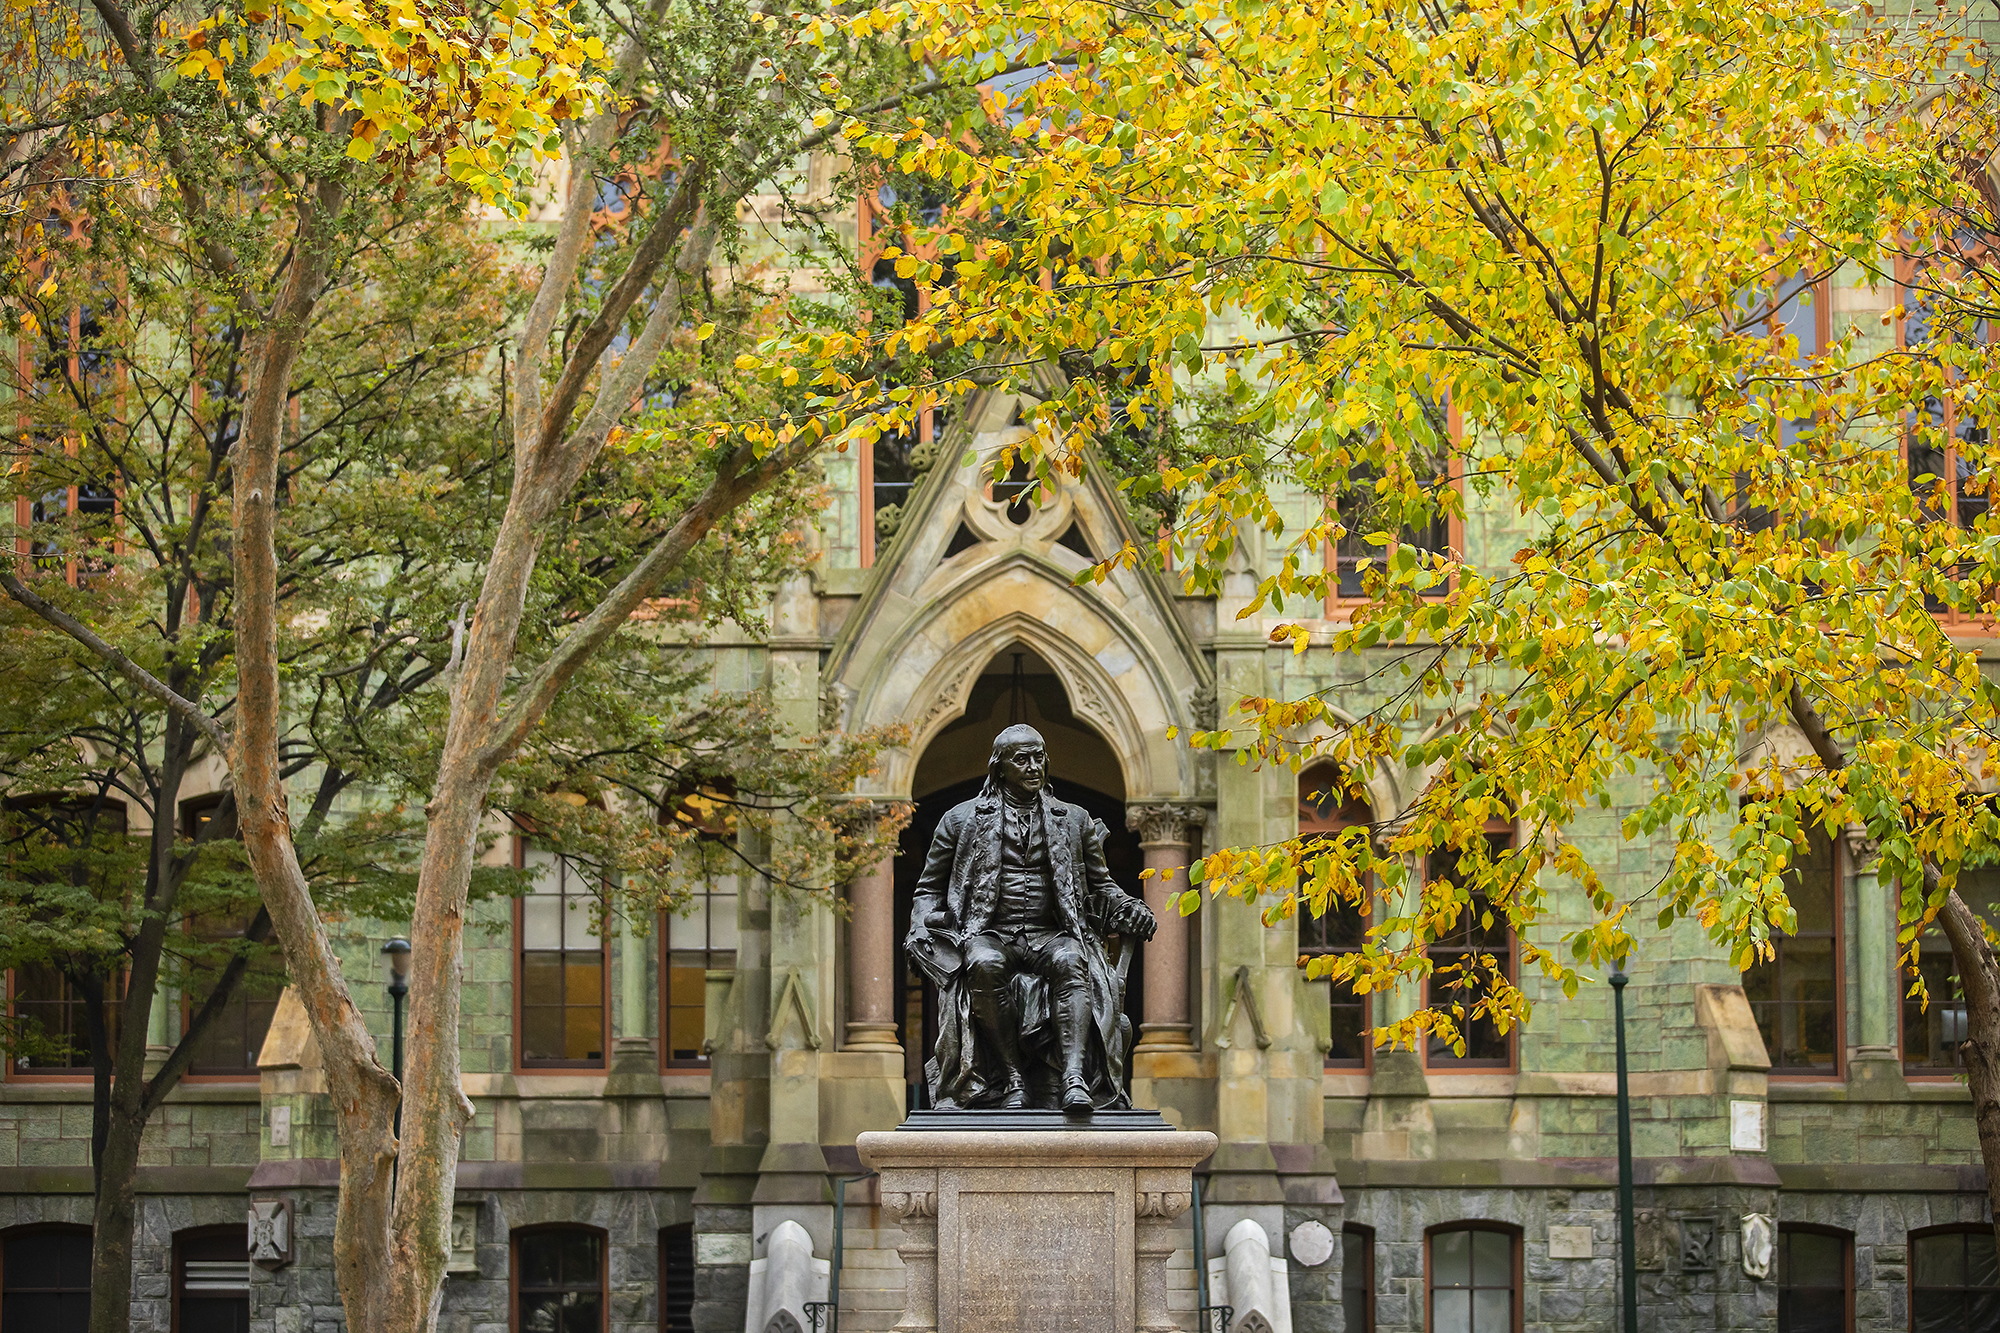 Ben Franklin statue on the campus green